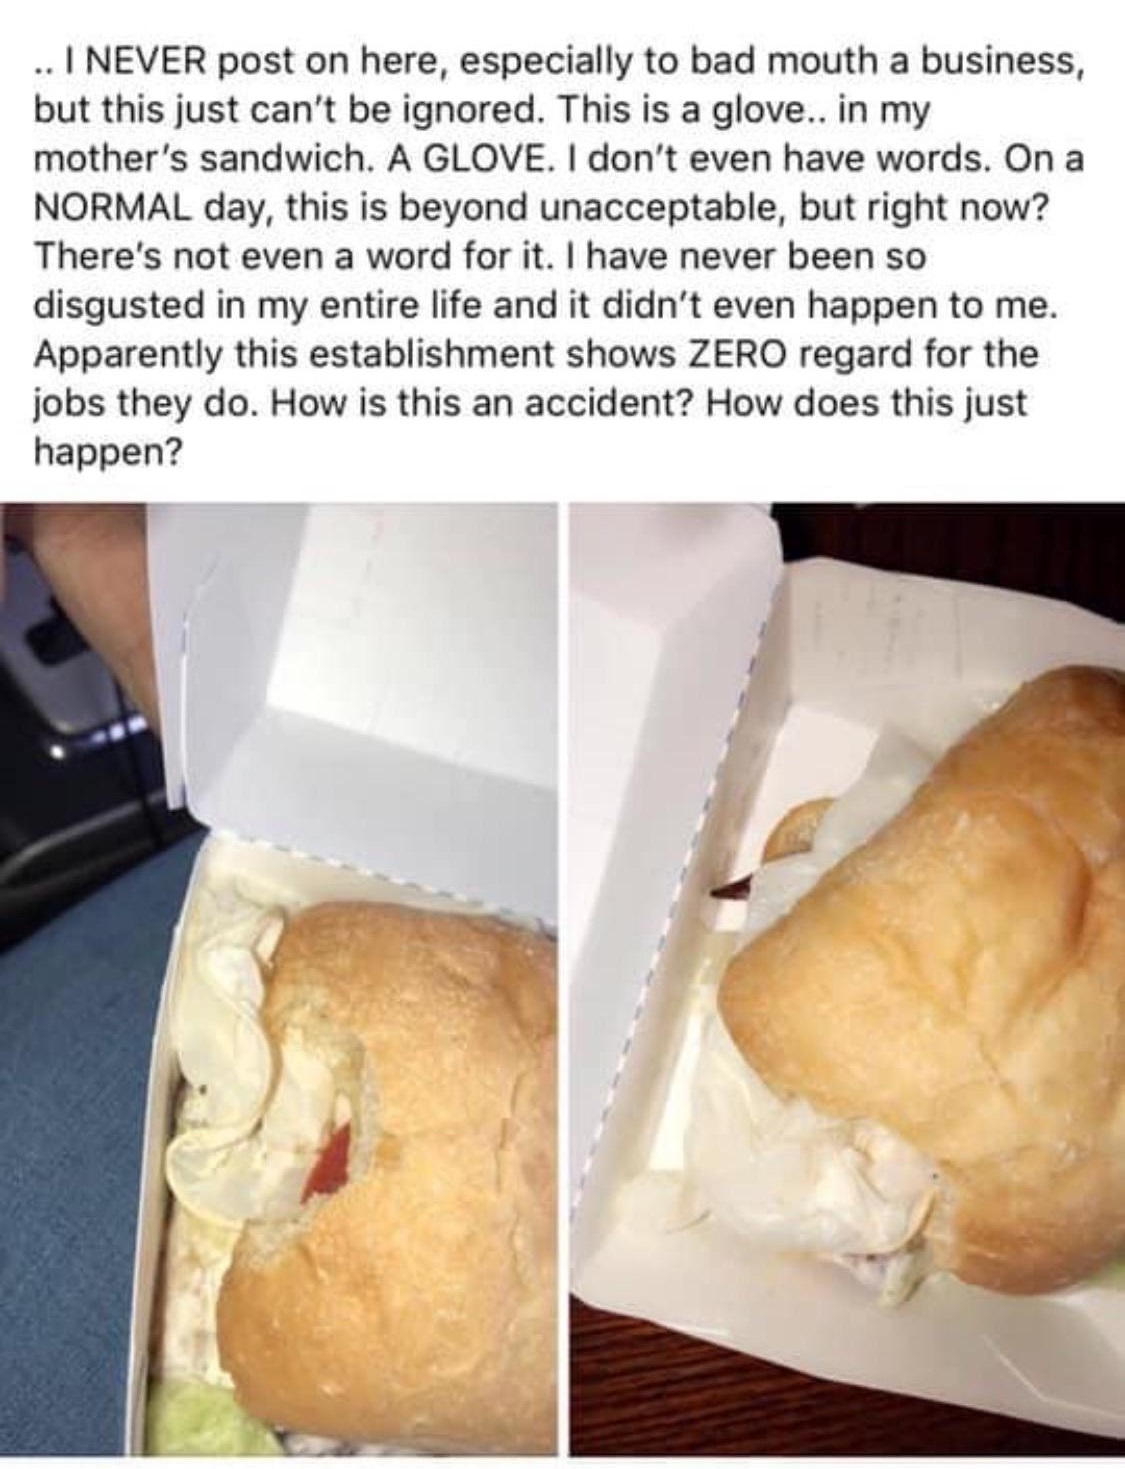 junk food - .. I Never post on here, especially to bad mouth a business, but this just can't be ignored. This is a glove.. in my mother's sandwich. A Glove. I don't even have words. On a Normal day, this is beyond unacceptable, but right now? There's not 